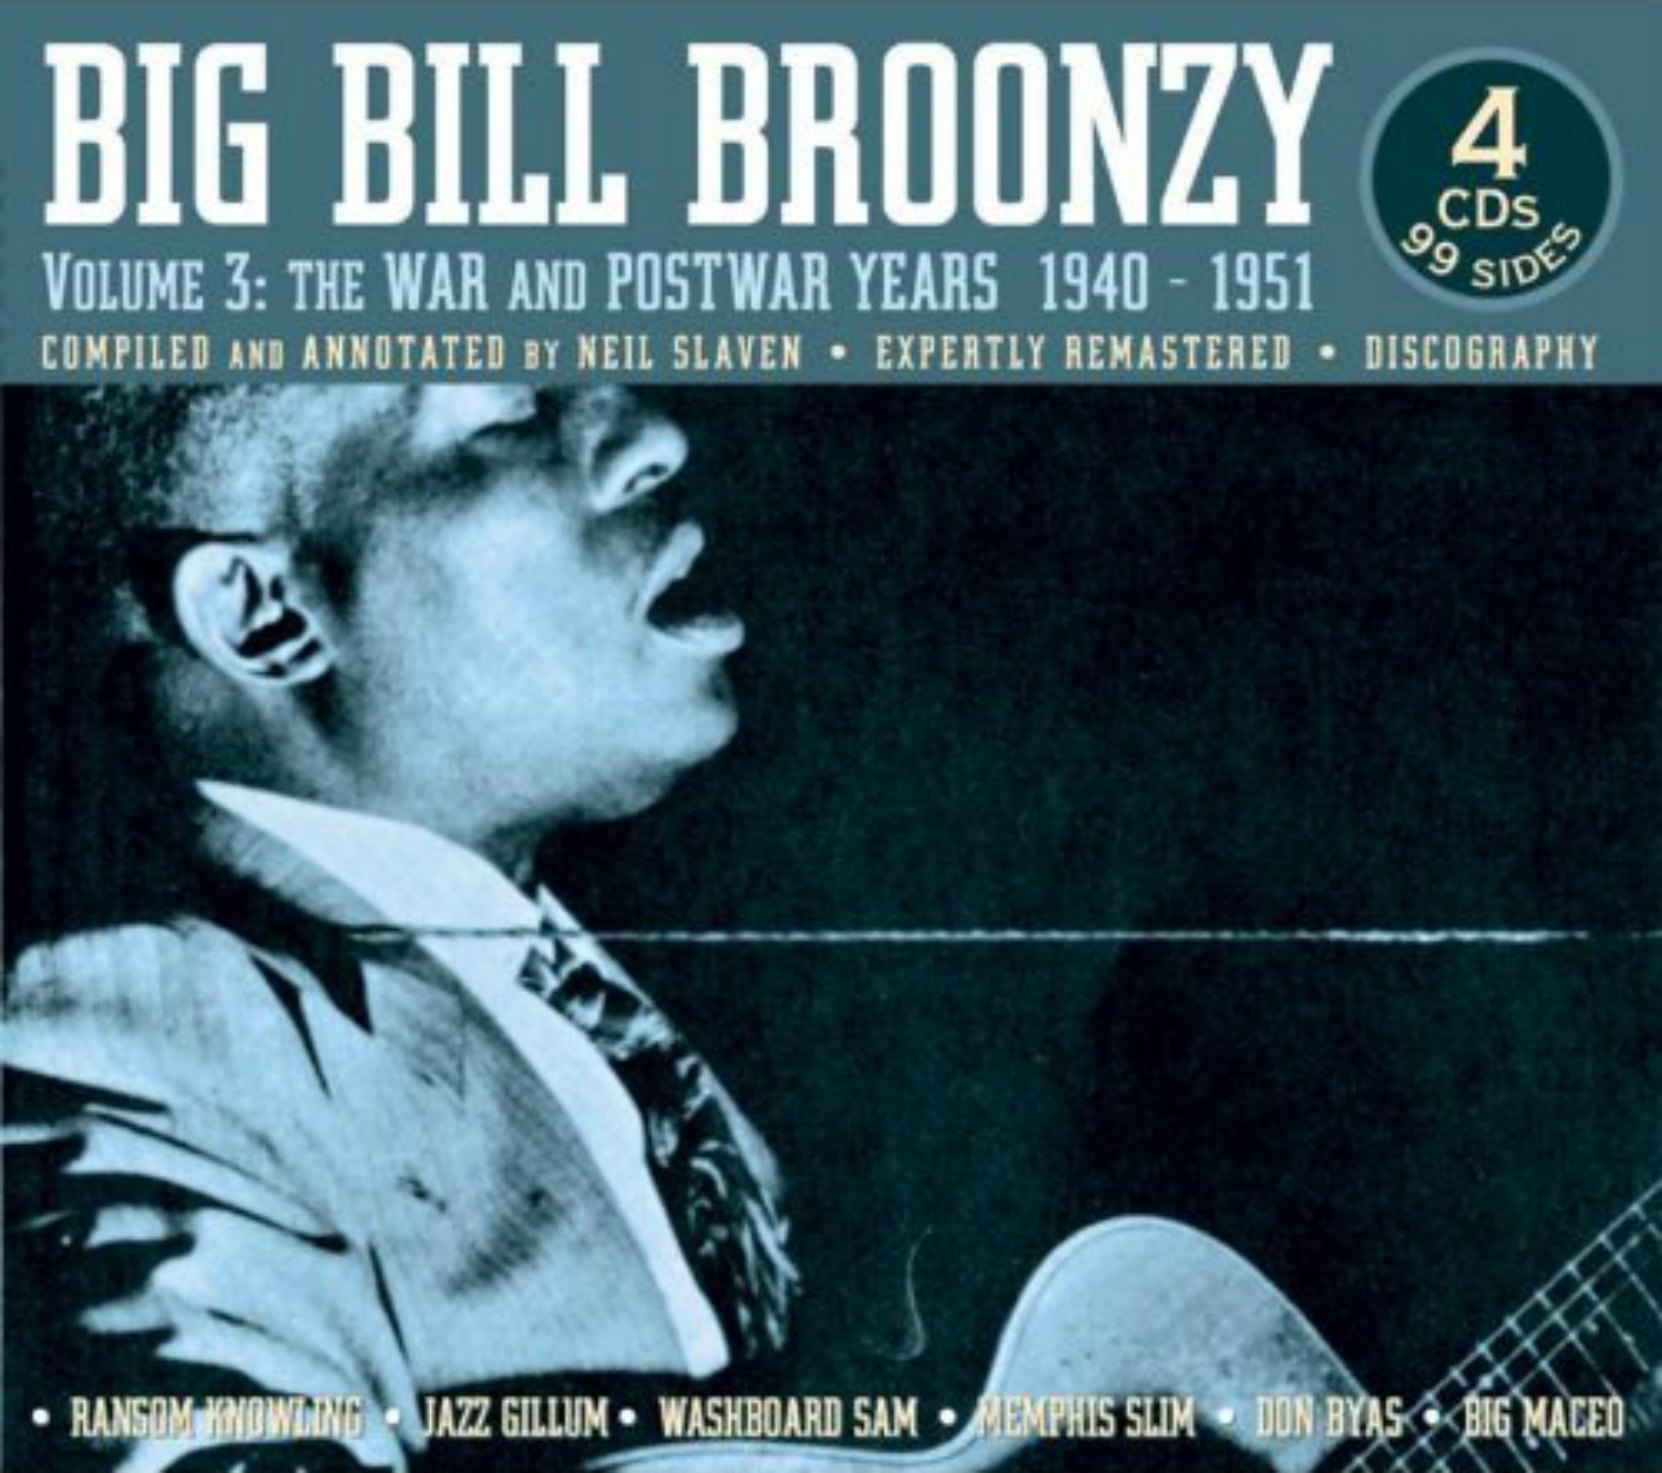 CD cover. Big Bill Broonzy, Volume 3: The War and Postwar years 1940-51, on JSP Records